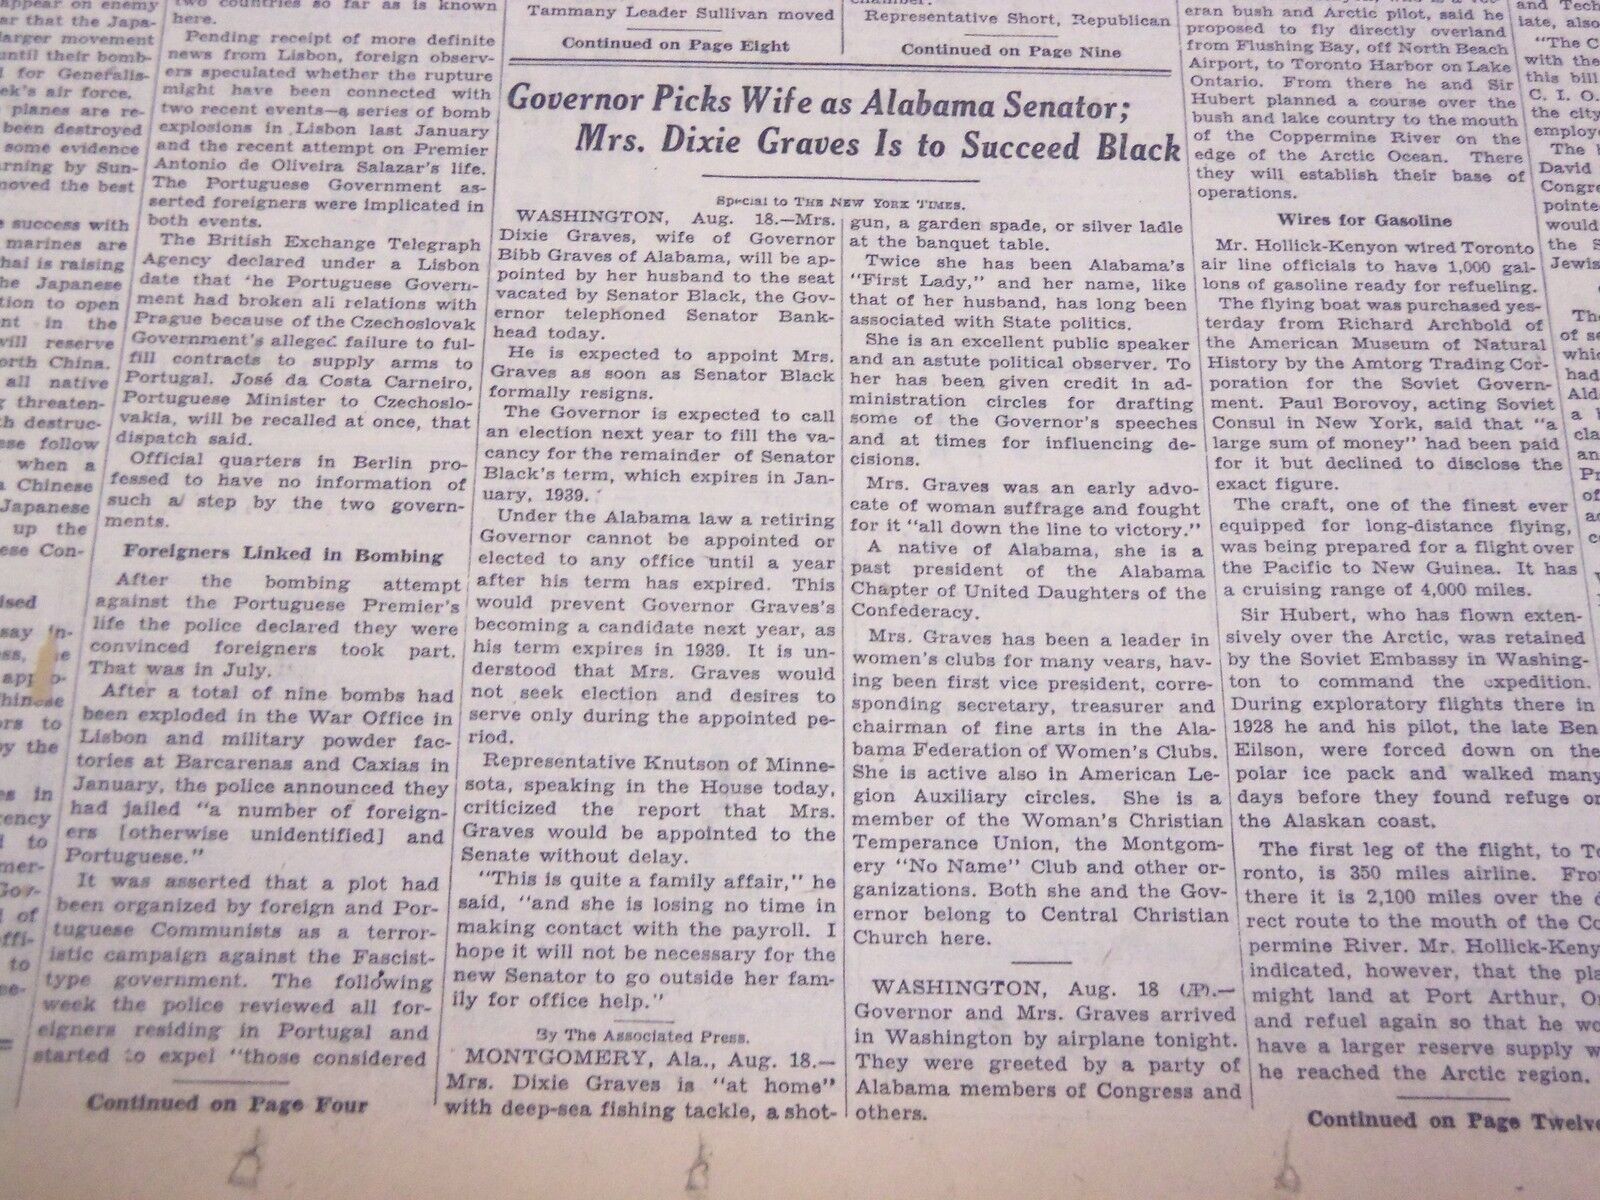 1937 AUGUST 19 NEW YORK TIMES - MRS. GRAVES TO SUCCEED BLACK - NT 3024